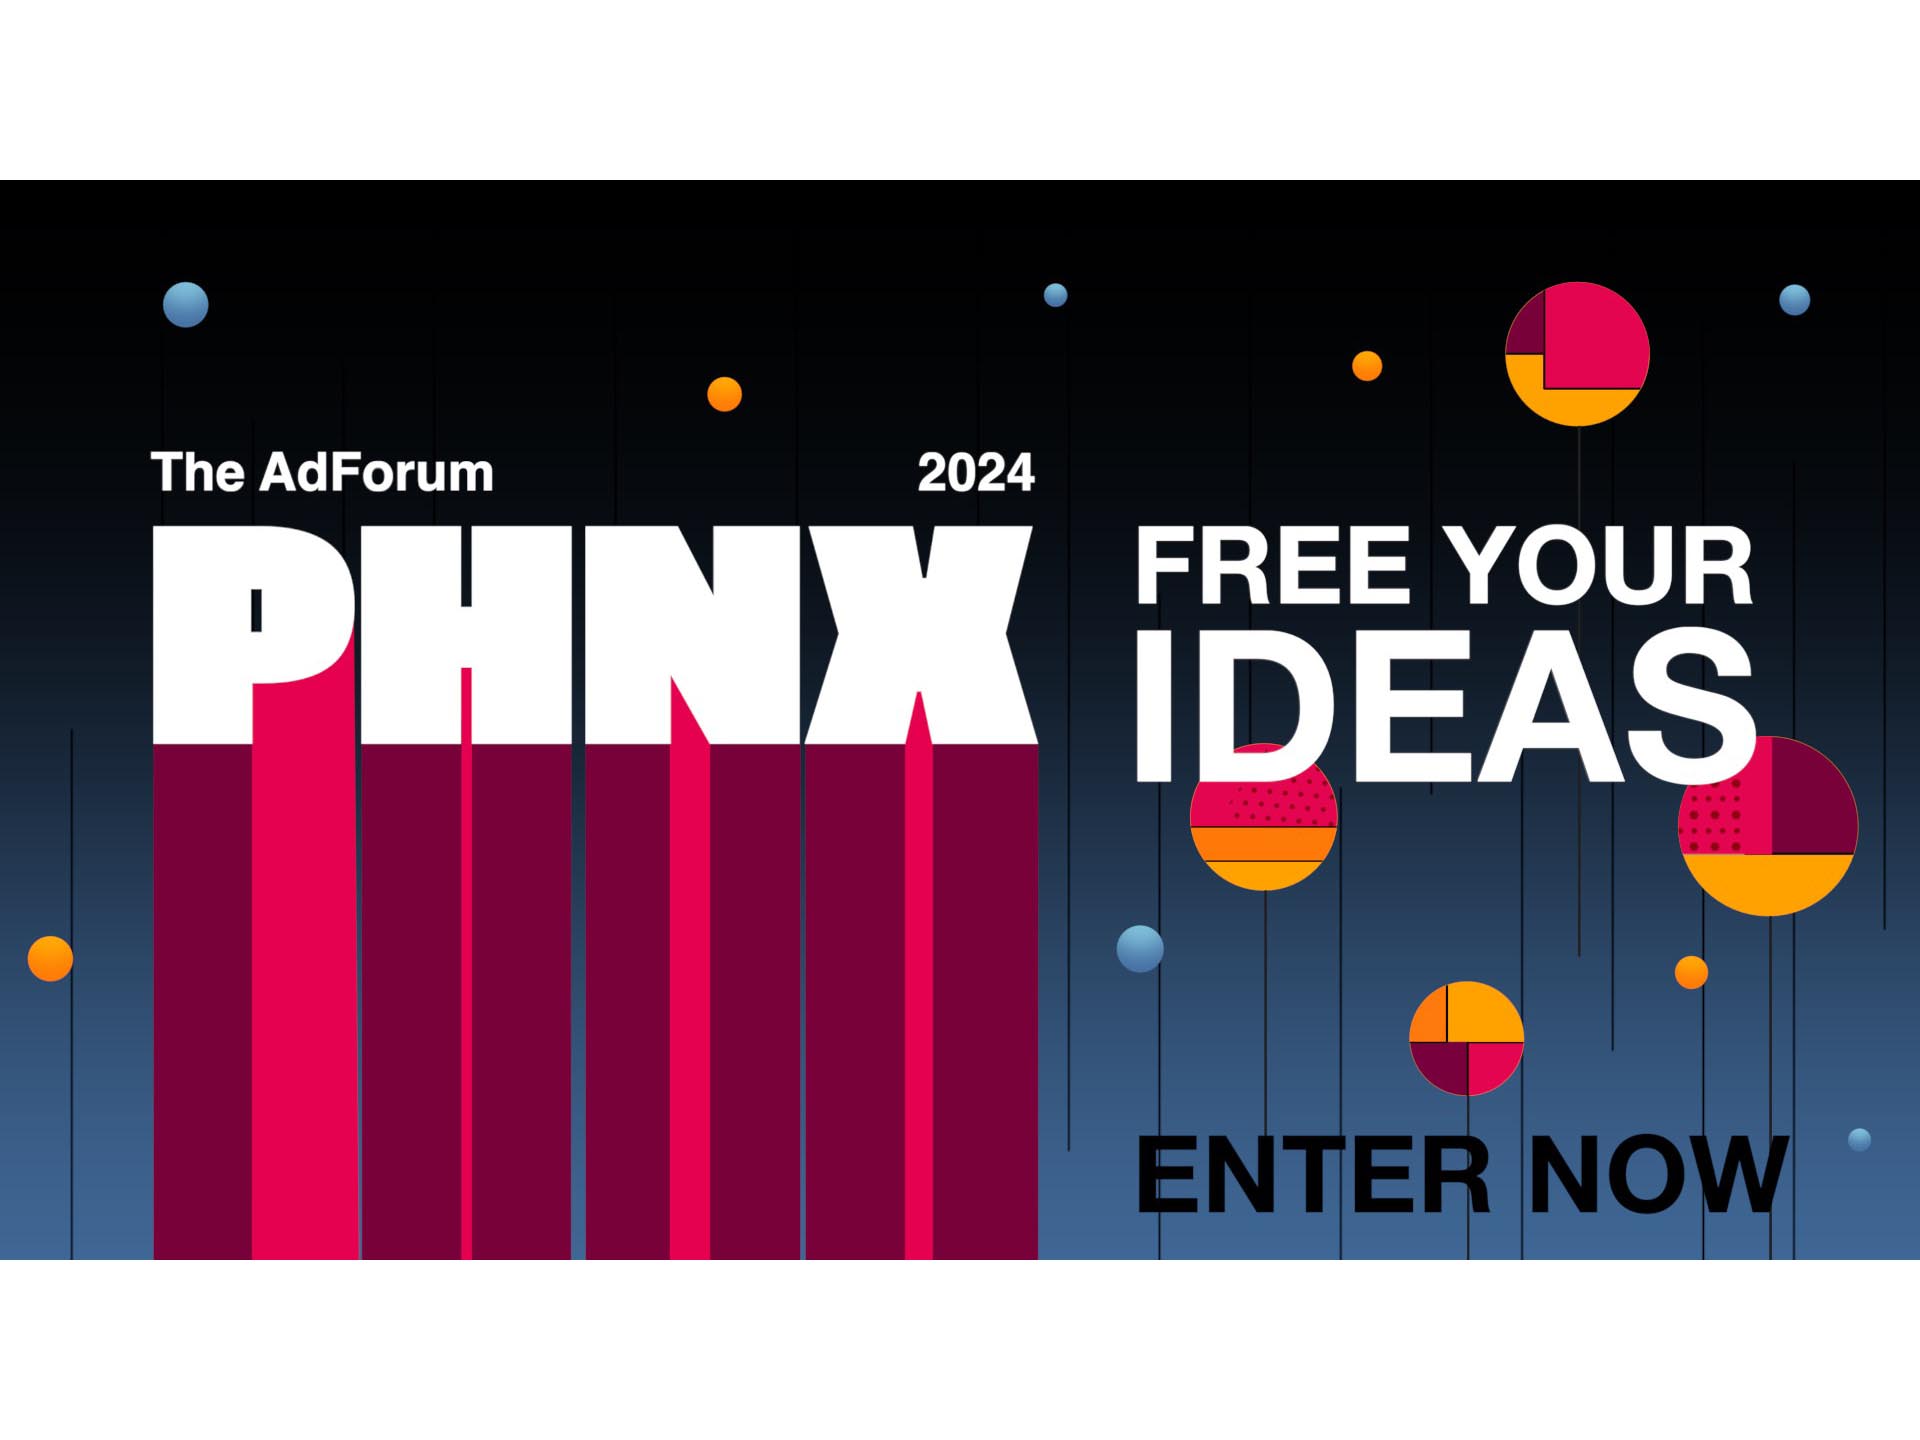 Free your ideas at the 2024 PHNX Awards